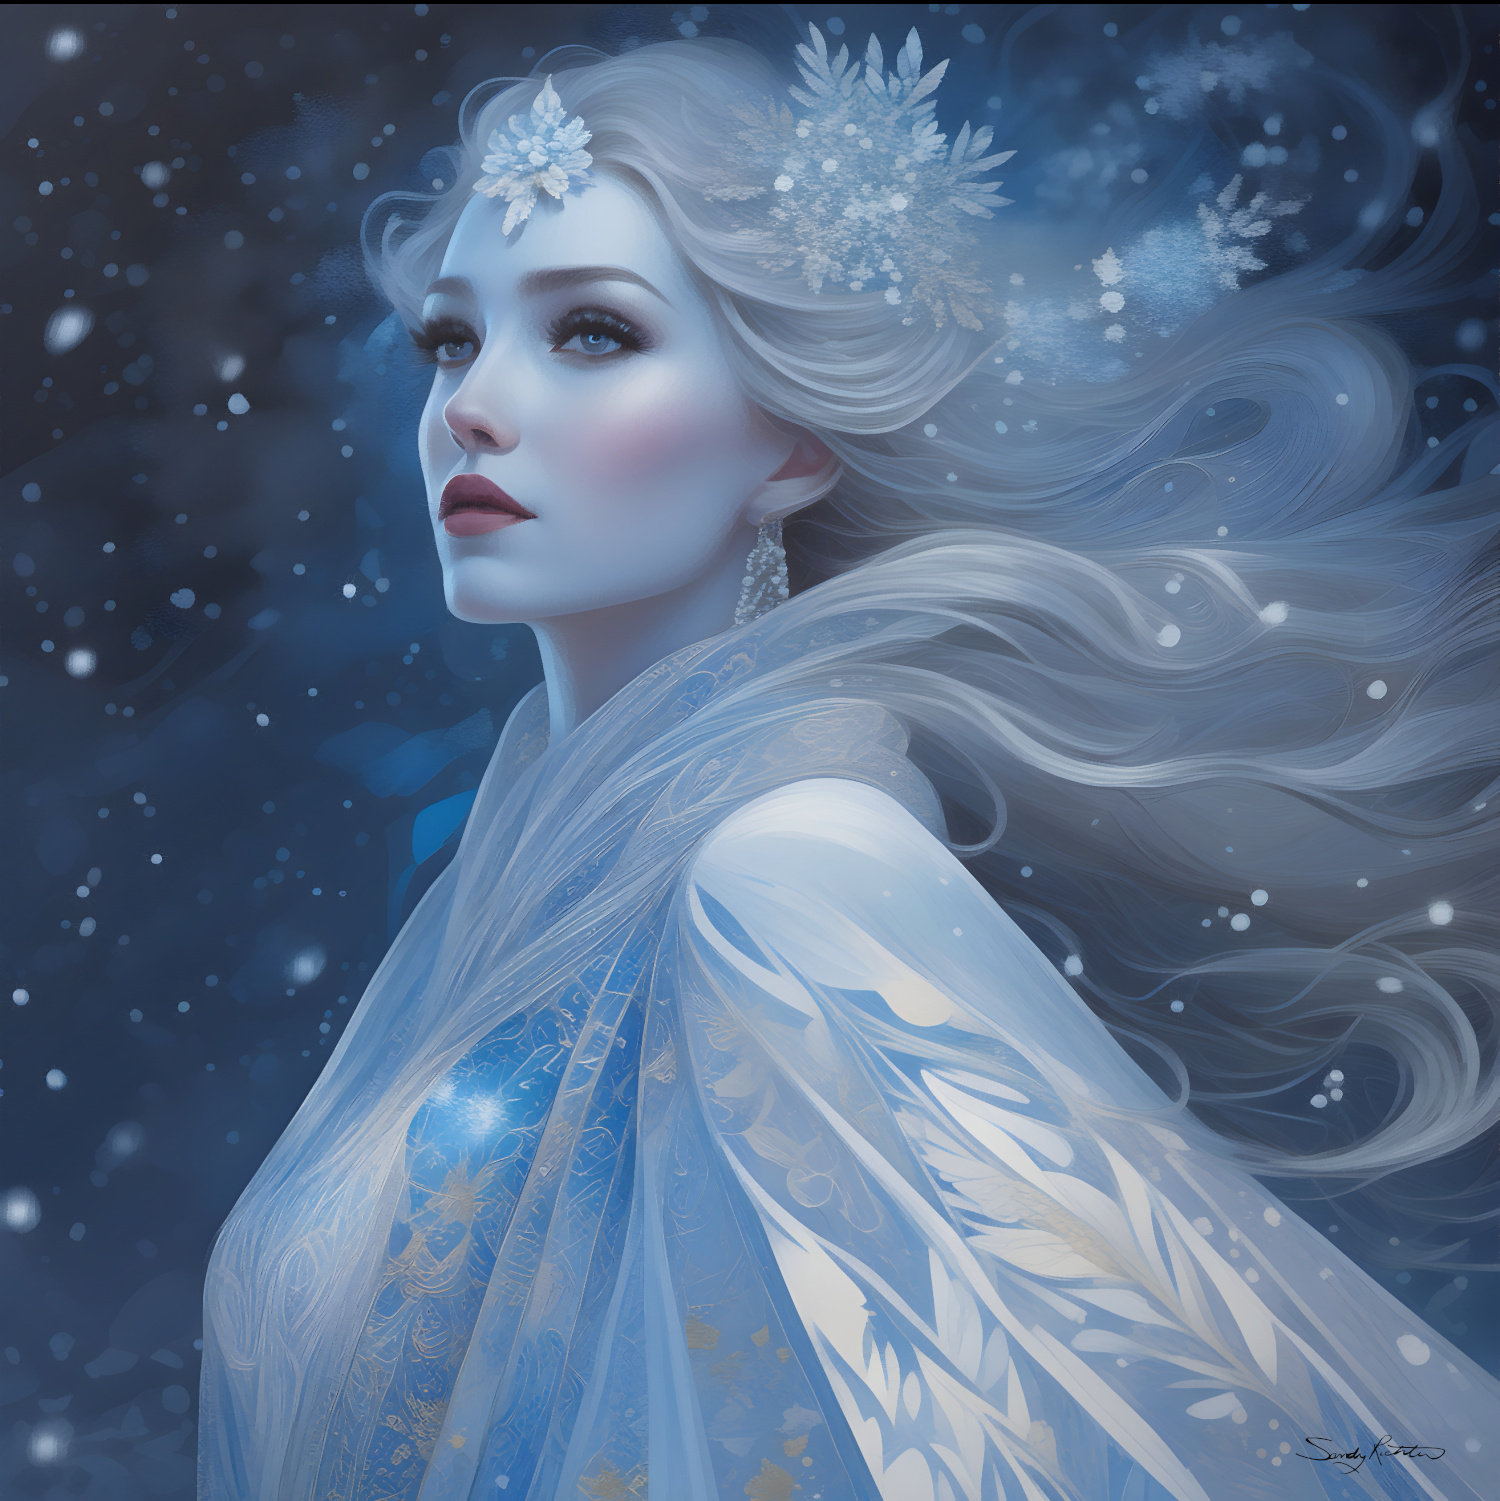 The Magic of the Snow Queen Fantasy Painting Let the Snow Queen's enchantment take you away ❄